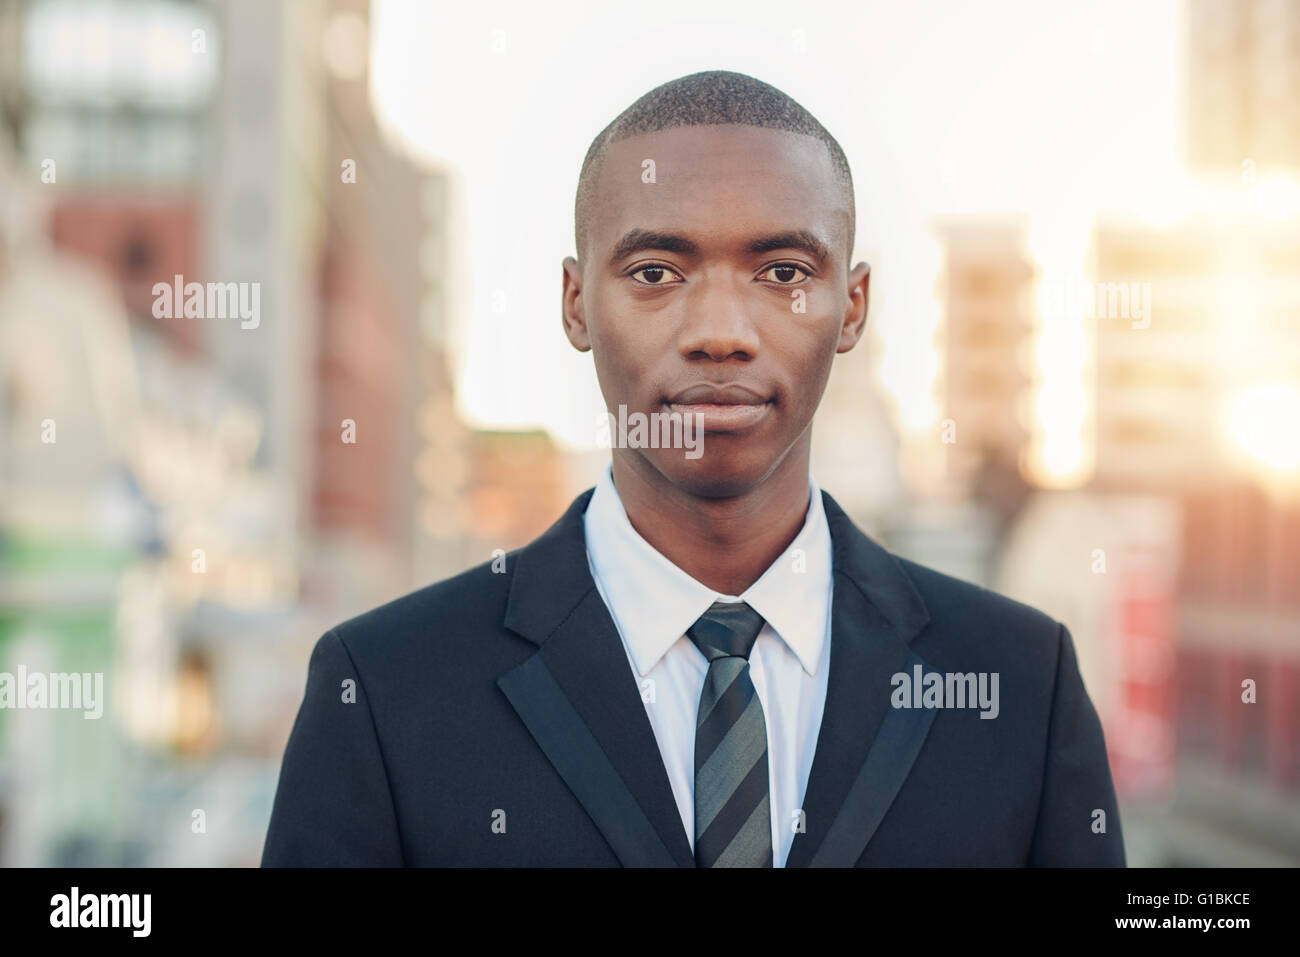 Portrait of a serious young African businessman in a corporate suit and tie, looking at the camera with an expression of confide Stock Photo